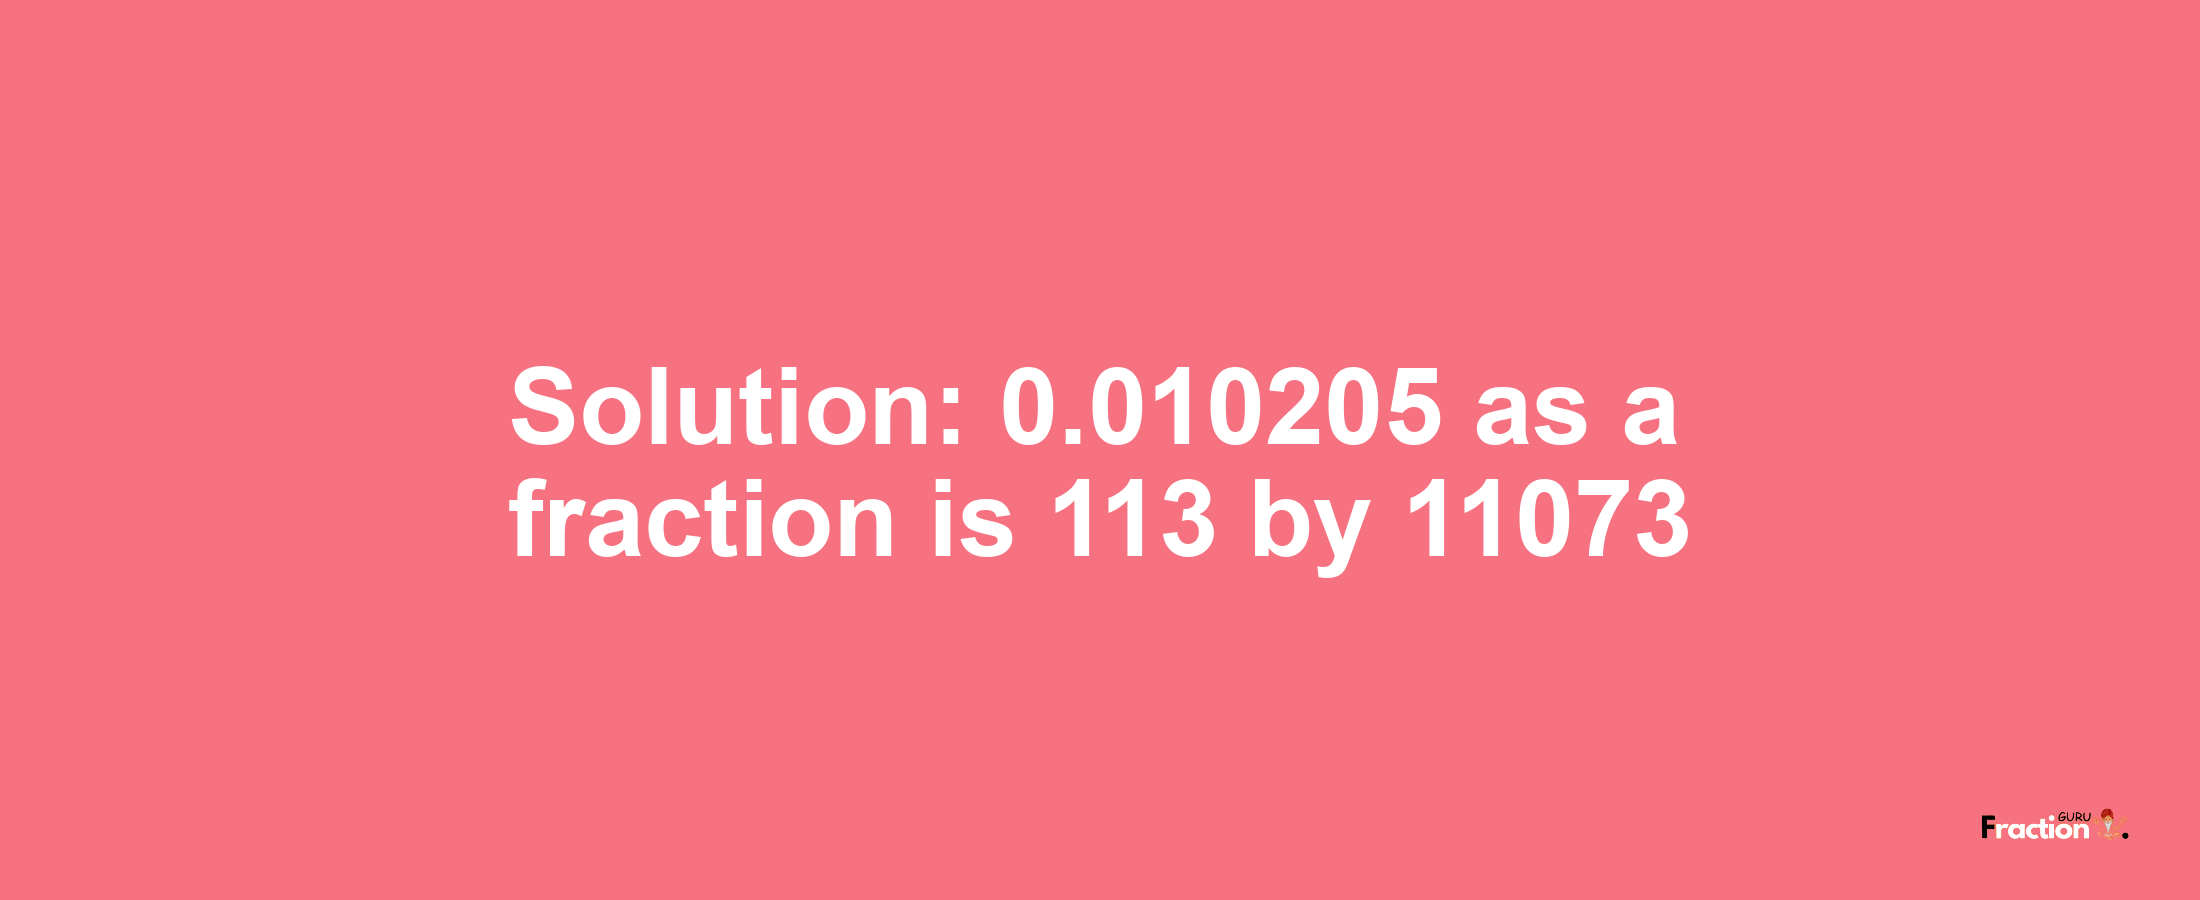 Solution:0.010205 as a fraction is 113/11073